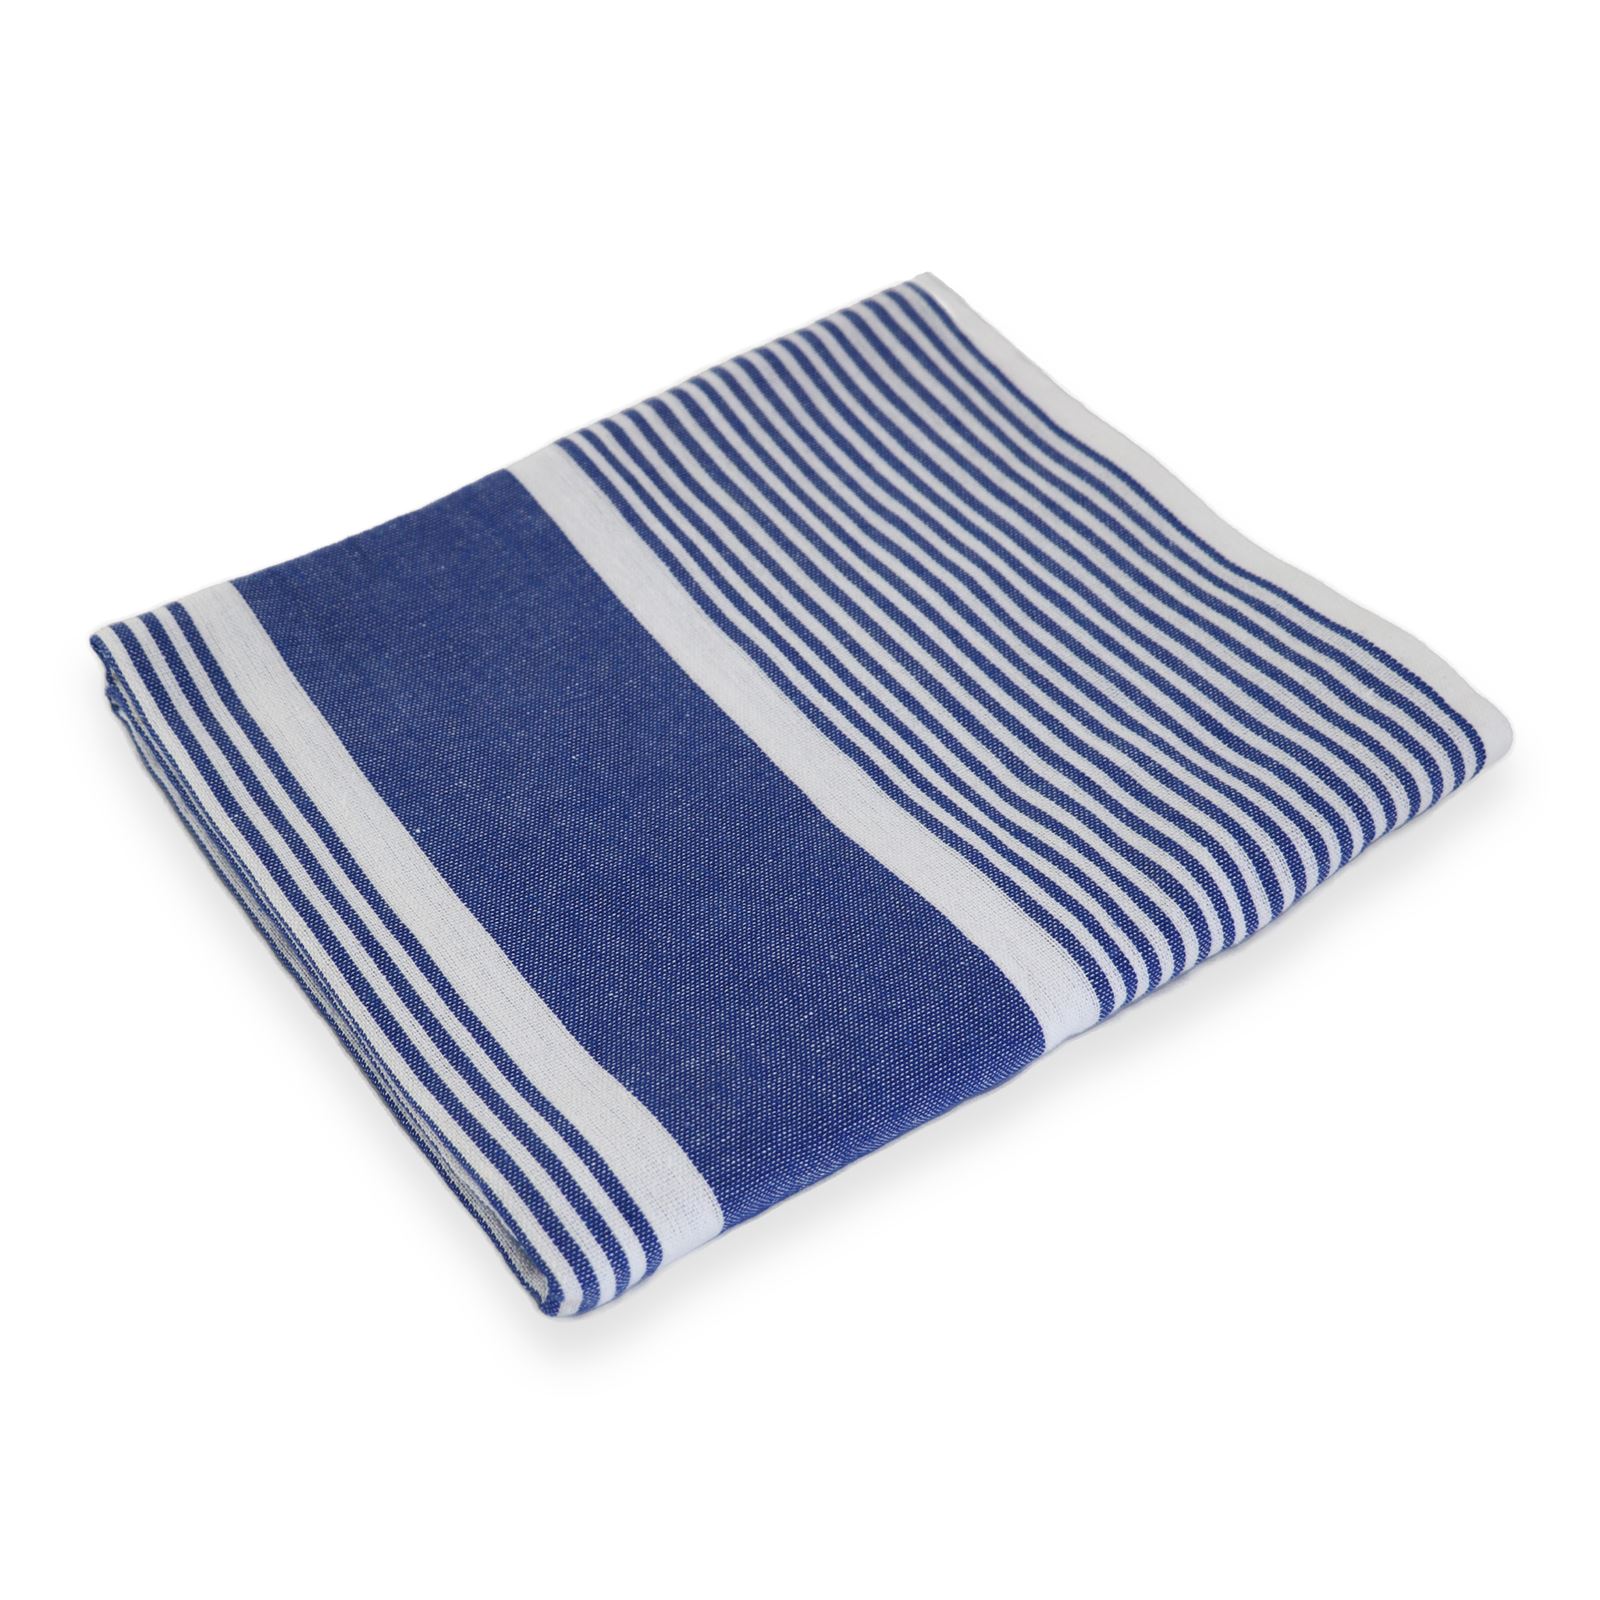 Blue Handloom Cotton Bed Sheets 45x78 (Inches) for Single Beds